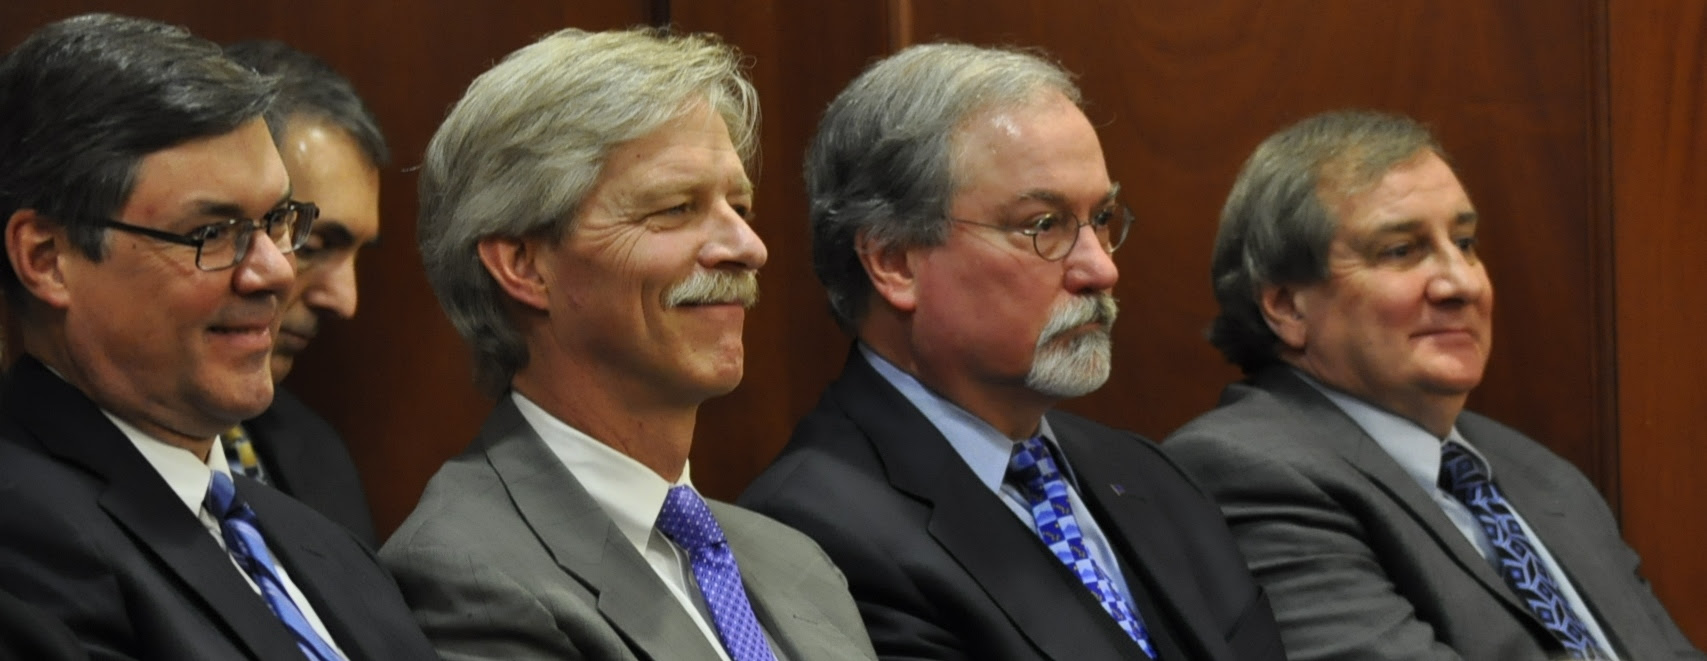 Alaska Supreme Court Justices Joel H. Bolger, Peter J. Maassen , Craig Stowers and Daniel E. Winfree (left to right), listen as then-Chief Justice Dana Fabe delivers the 2014 State of the Judiciary Address. Bolger and Maassen face judicial retention elections. (Photo by Skip Gray, Gavel Alaska)